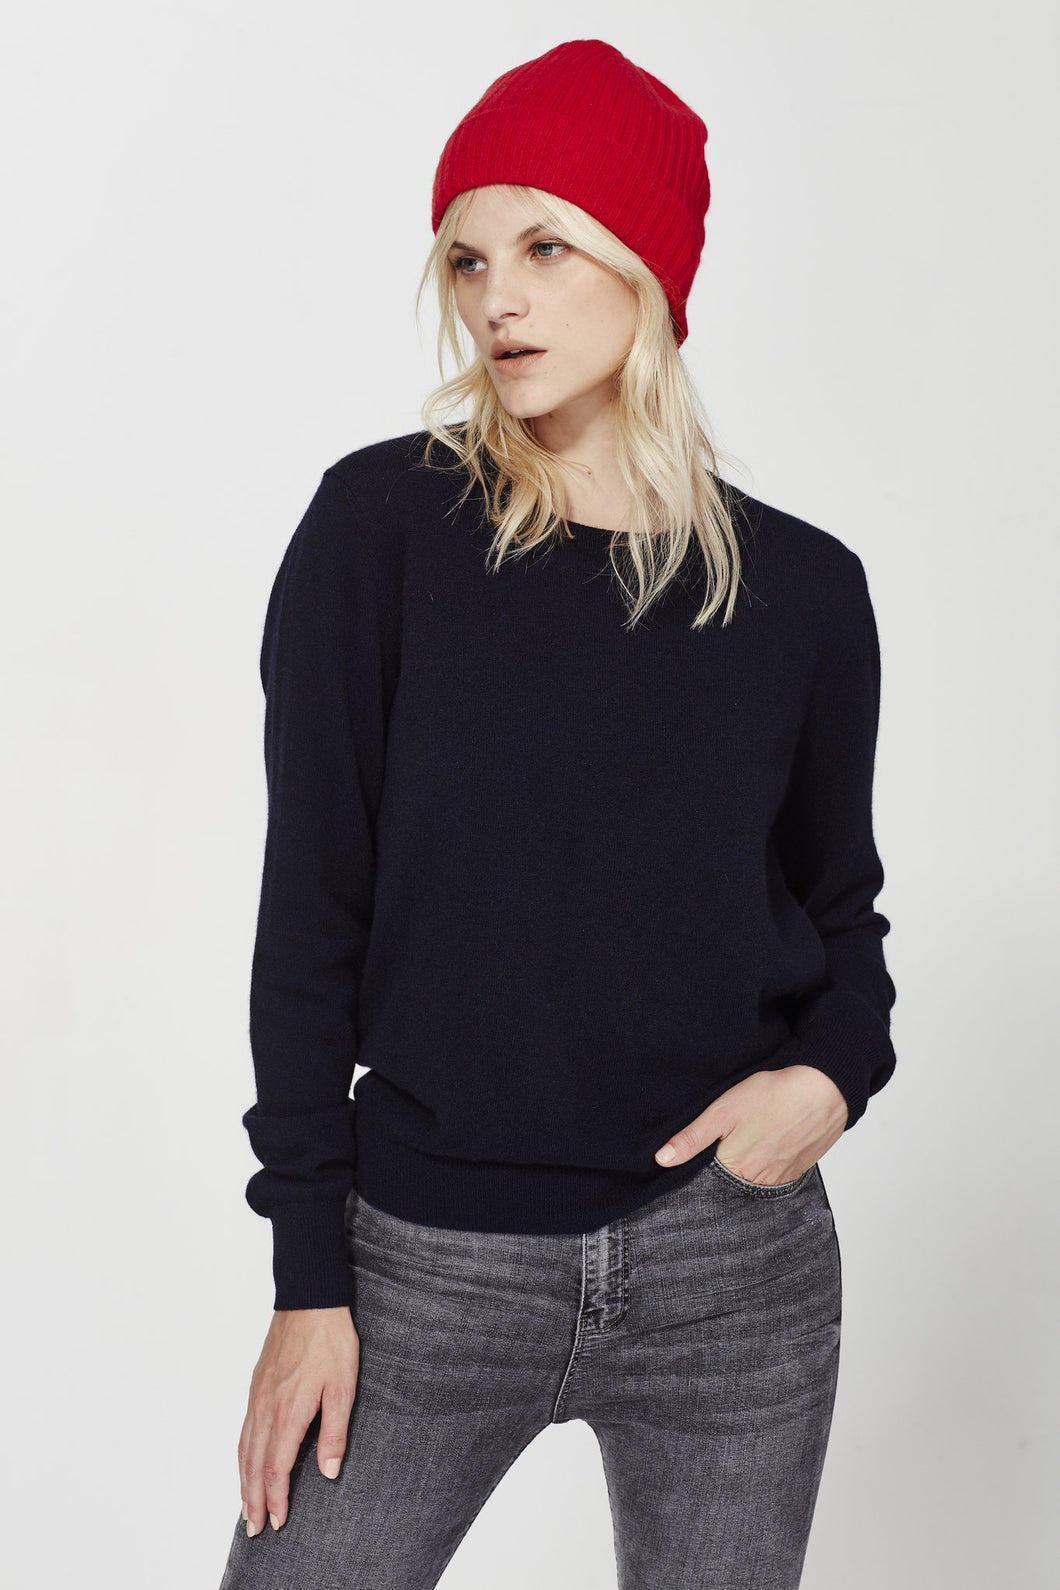 Cashmere Beanie in Red